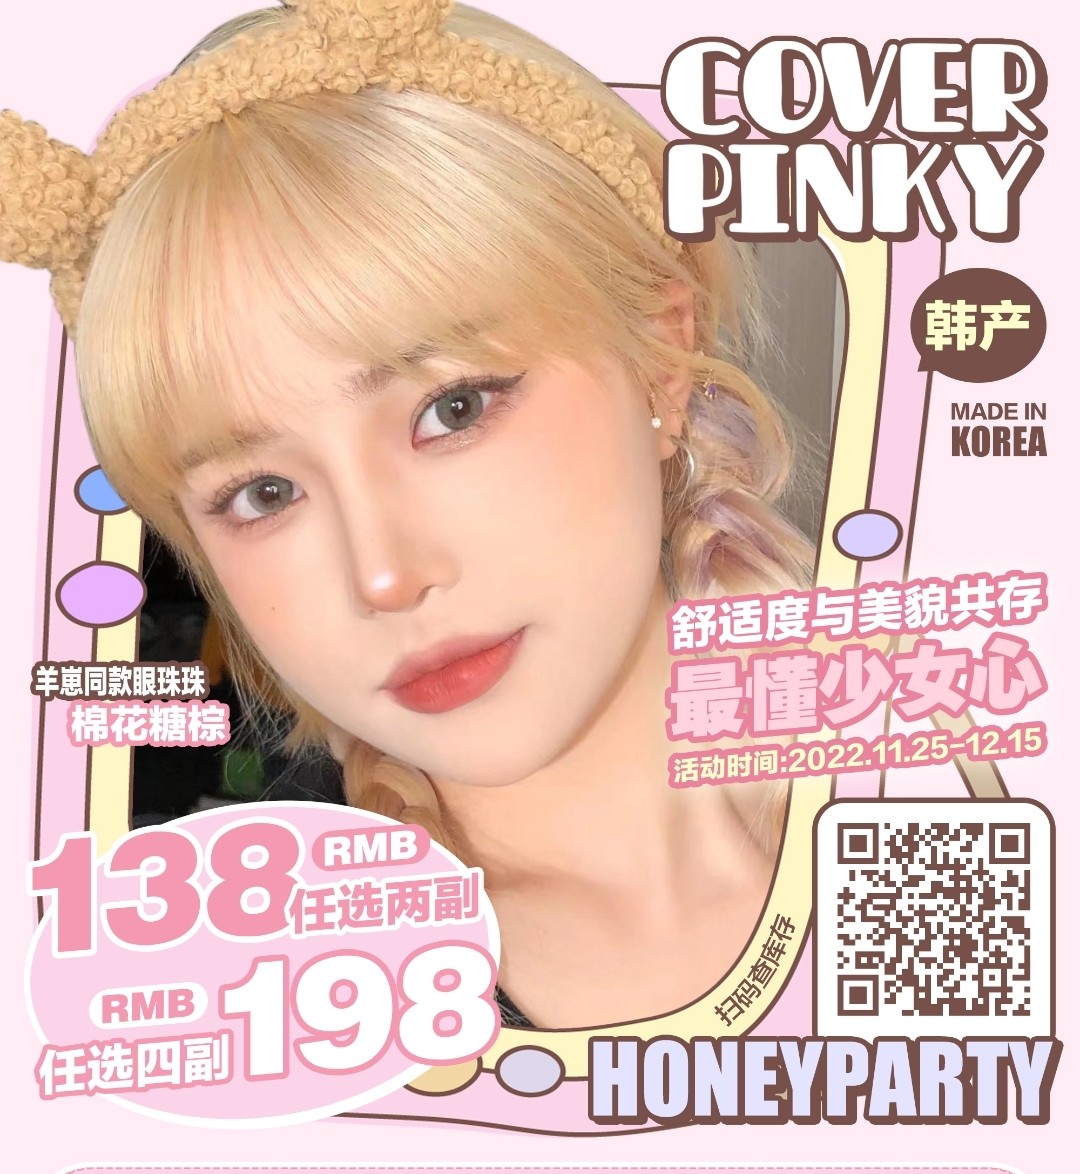 HoneyParty&Coverpinky 双12囤货计划